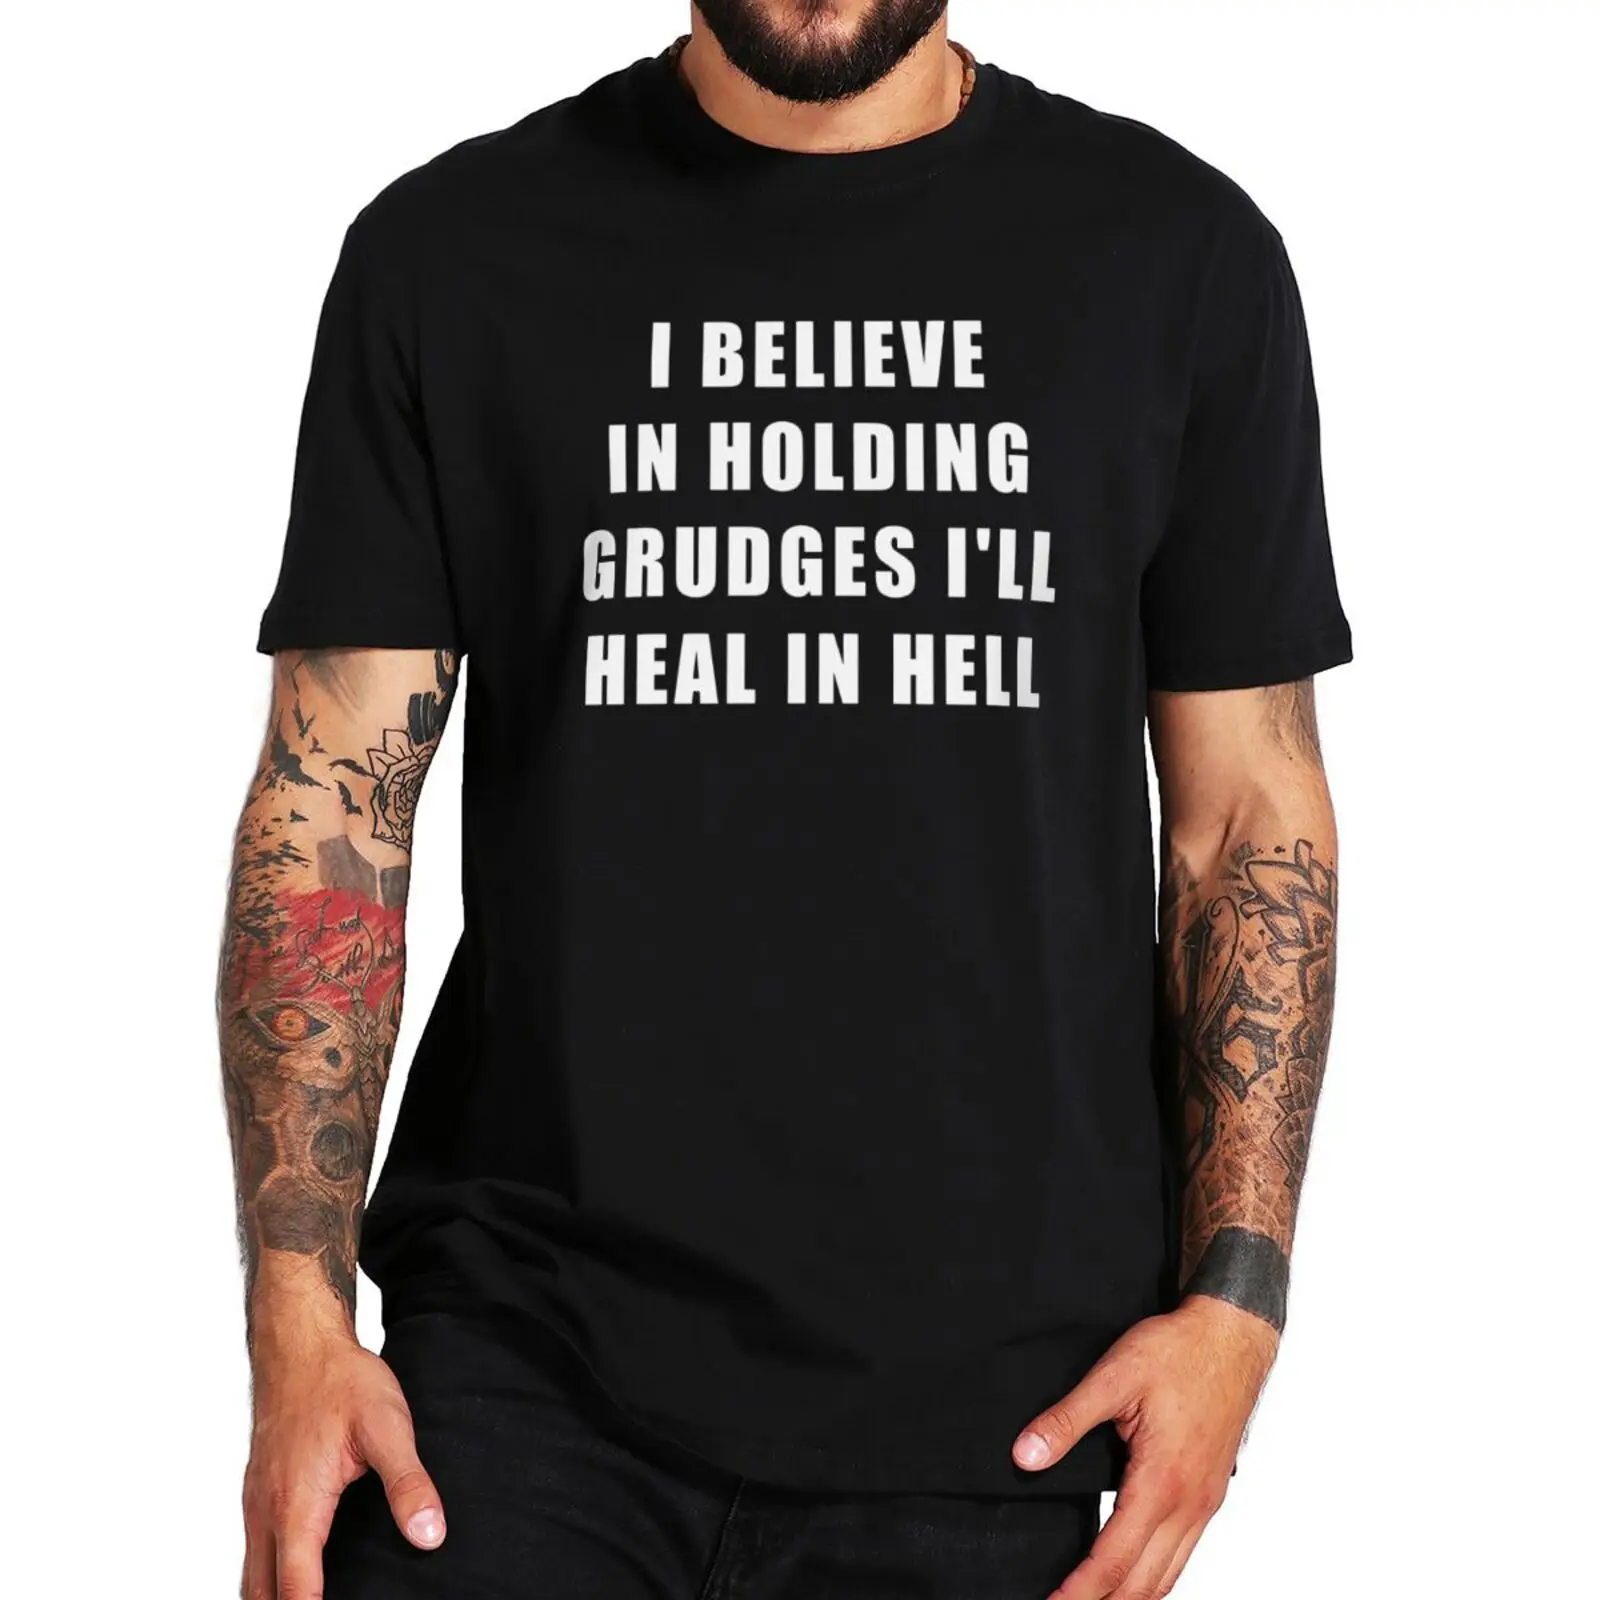 

I Believe In Holding Grudges I'll Heal In Hell T Shirt Funny Sayings T-shirts For Men Women Casual 100% Cotton O-neck Tops